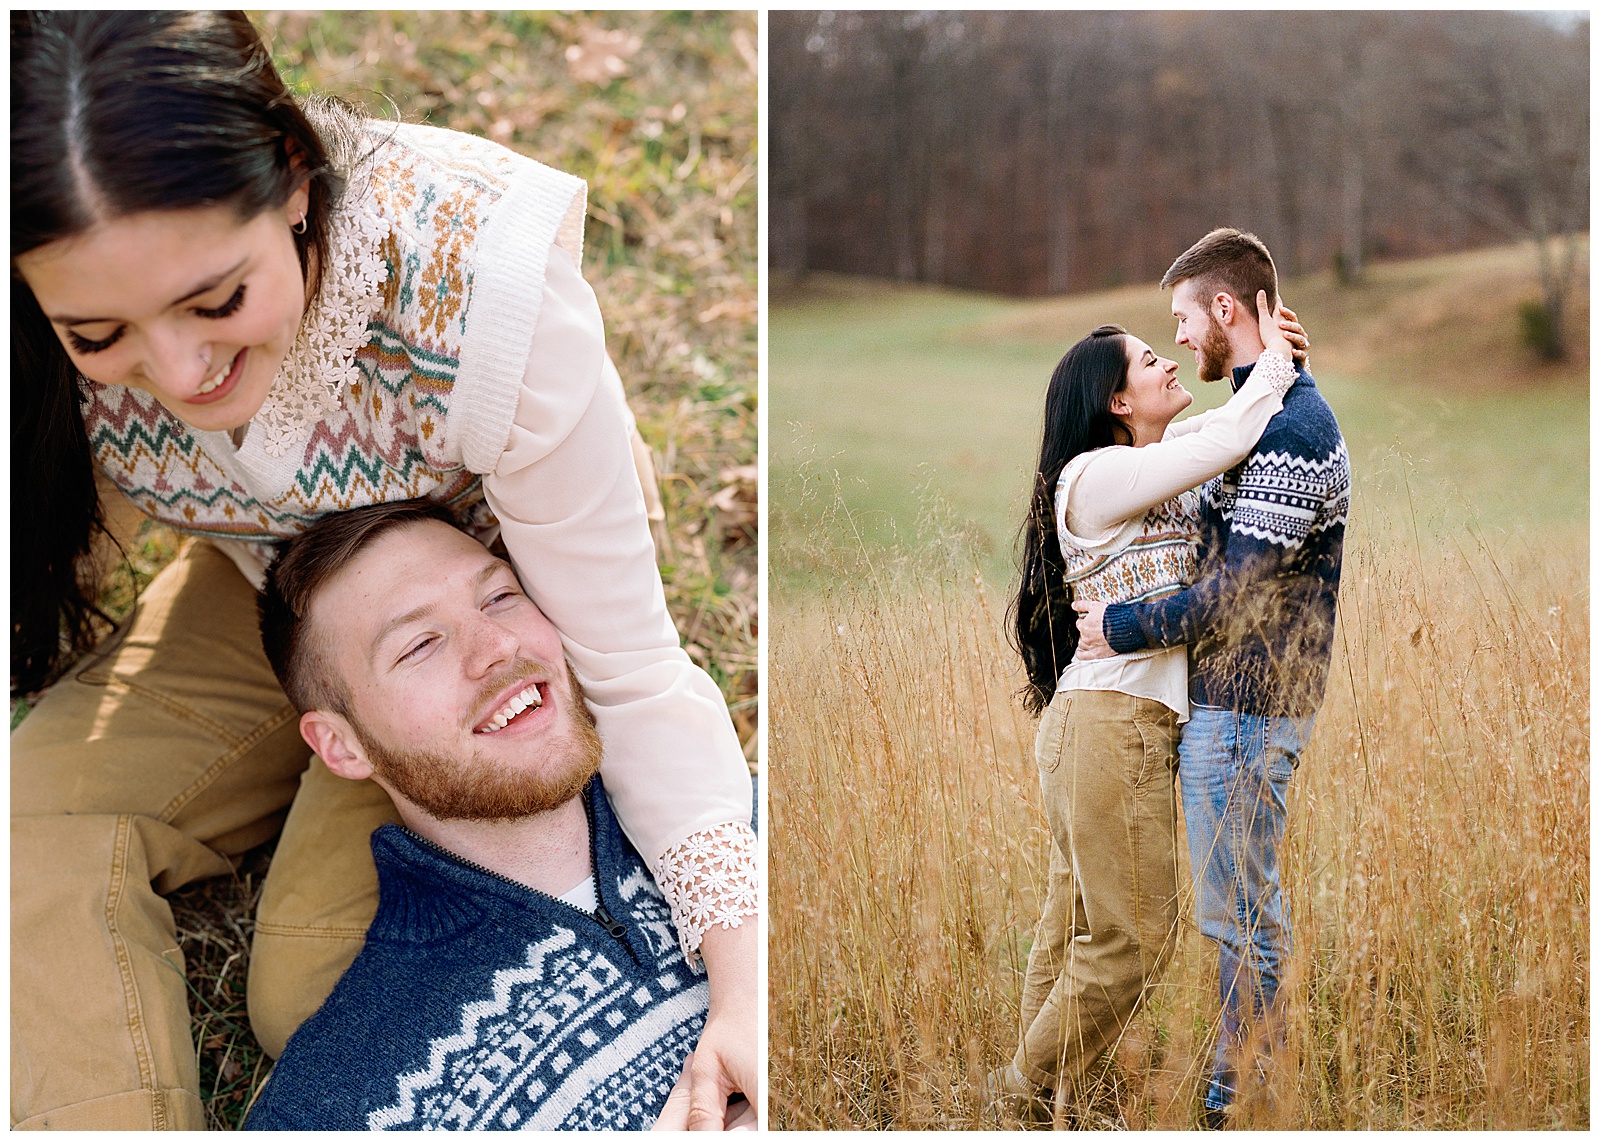 Engaged man and woman snuggled up and laughing in meadow at sunset in sweaters for their winter engagement session.